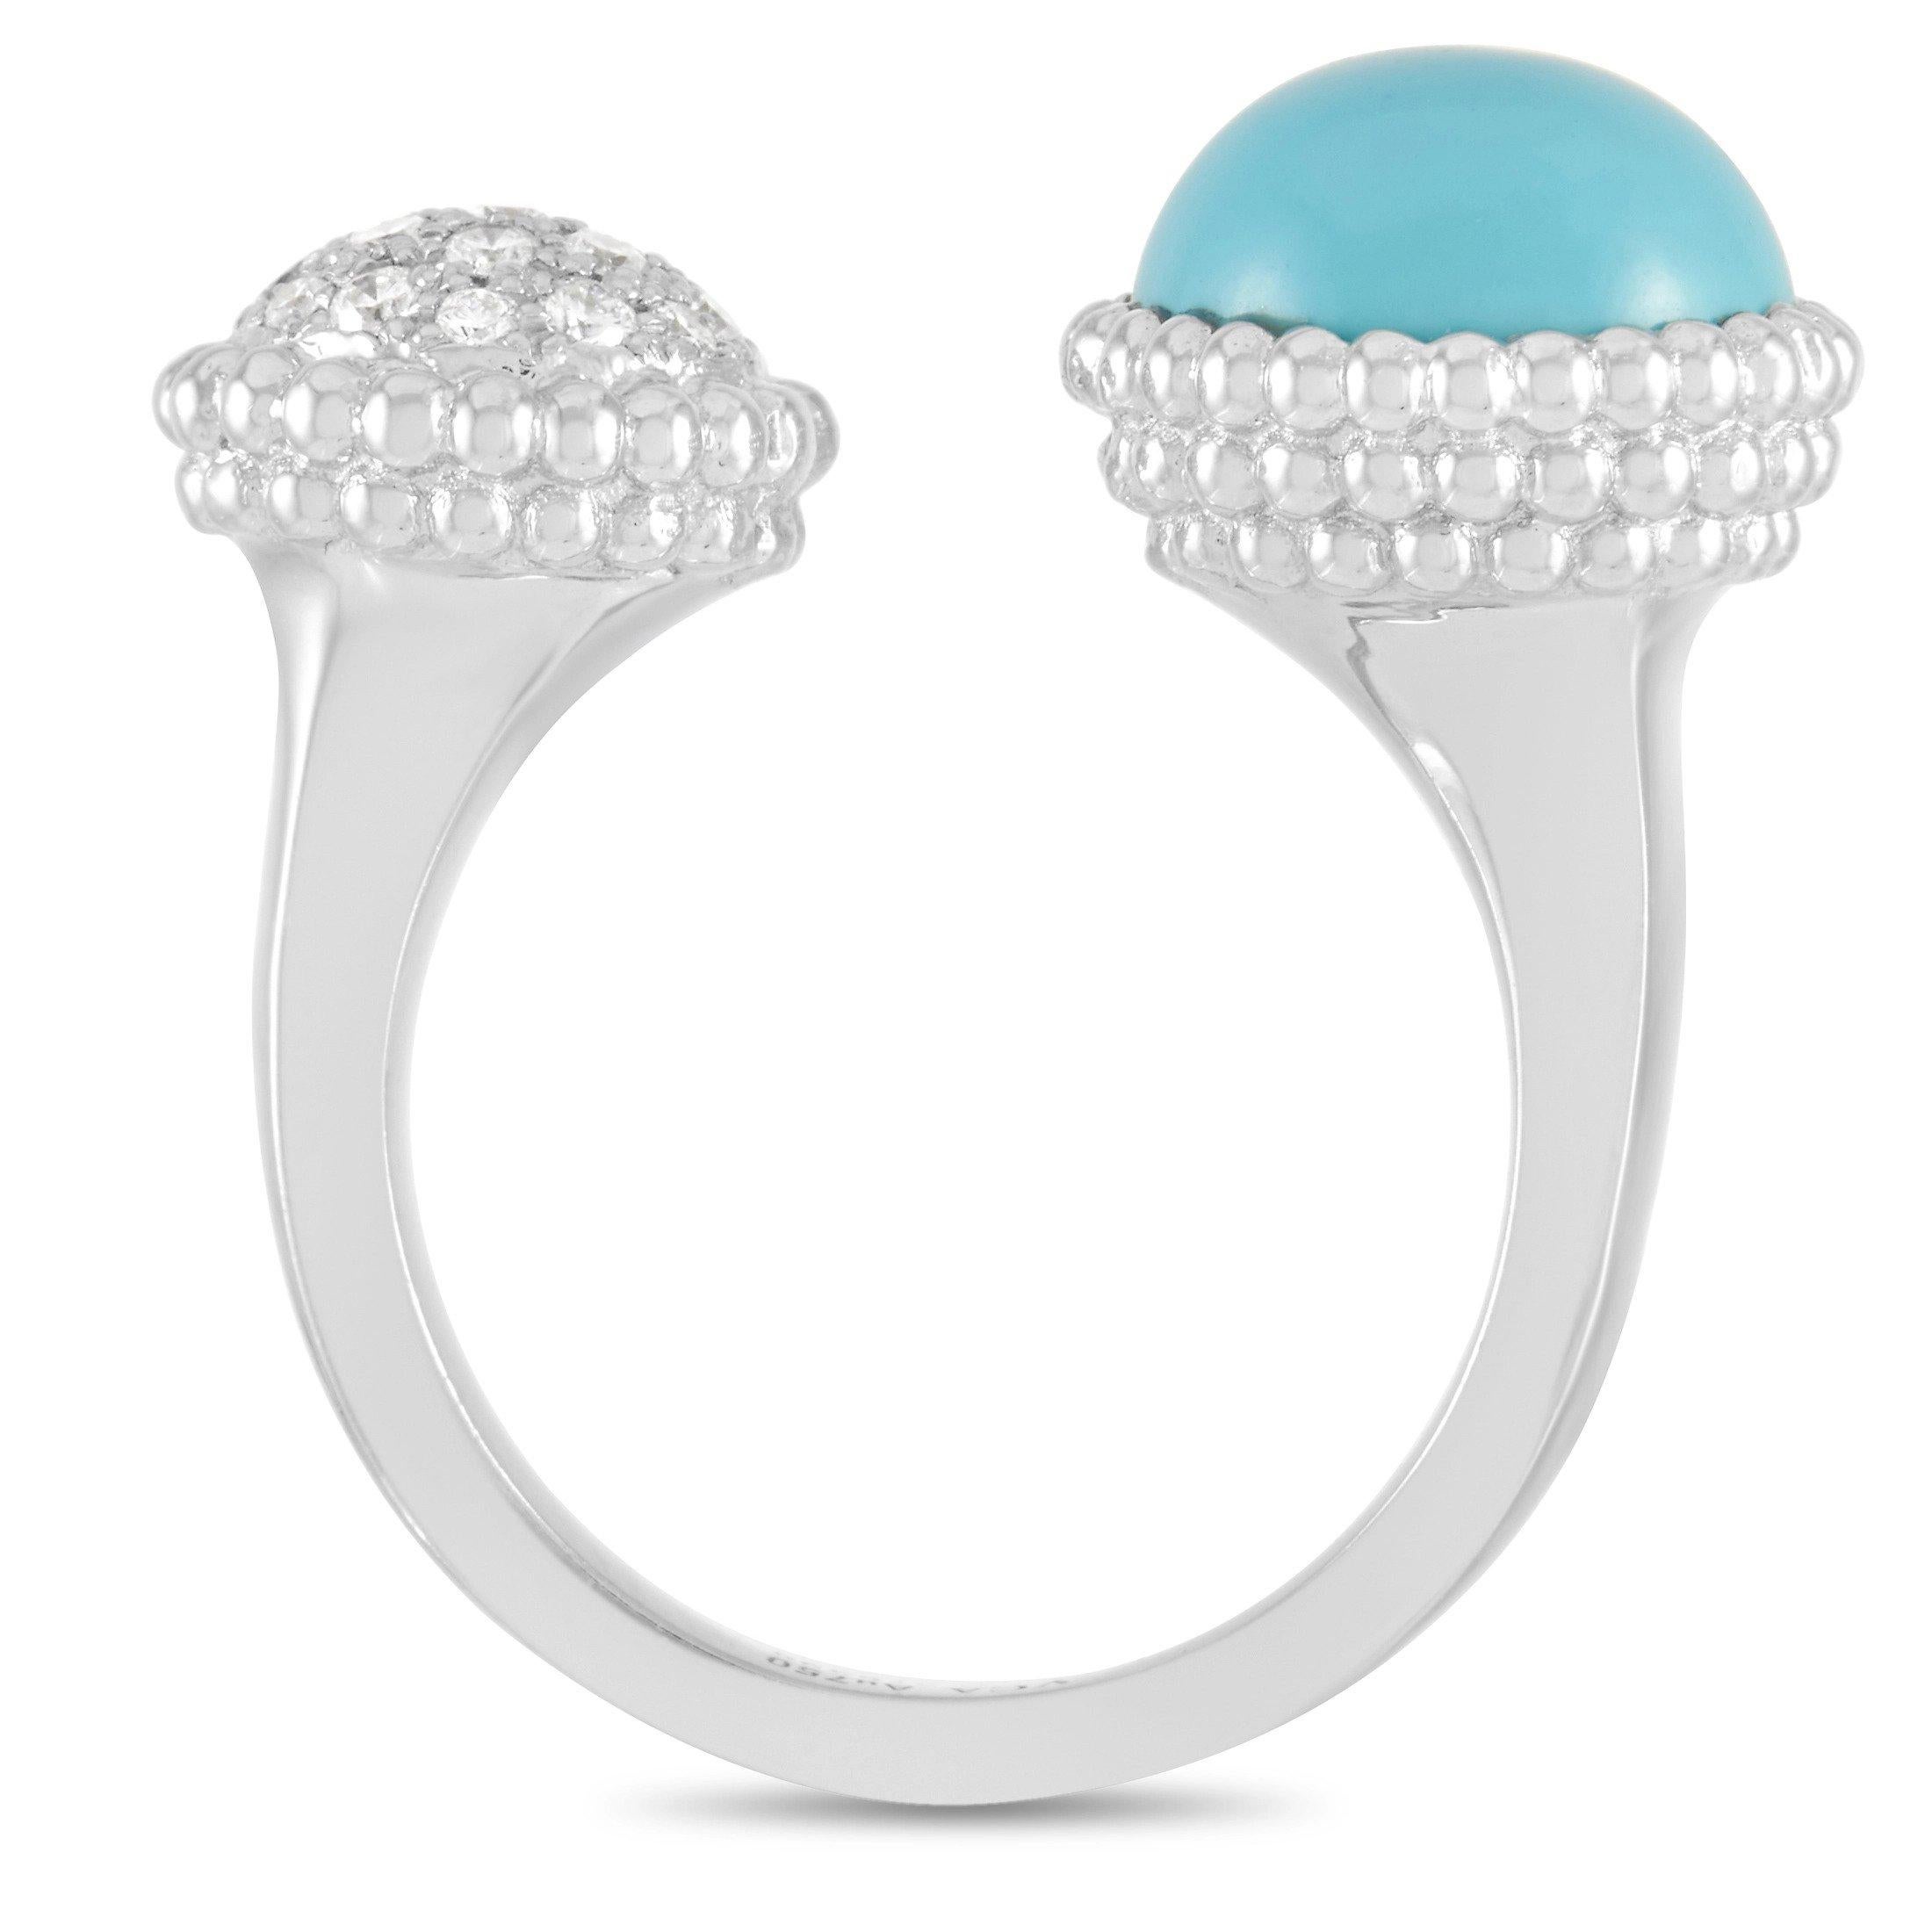 A major hand statement. The VCA Perlée 18K White Gold Diamond and Turquoise Statement Ring is an elegant and playful piece of jewelry that will take your accessorizing game to the next level. It features a 4mm open shank with one end topped with a